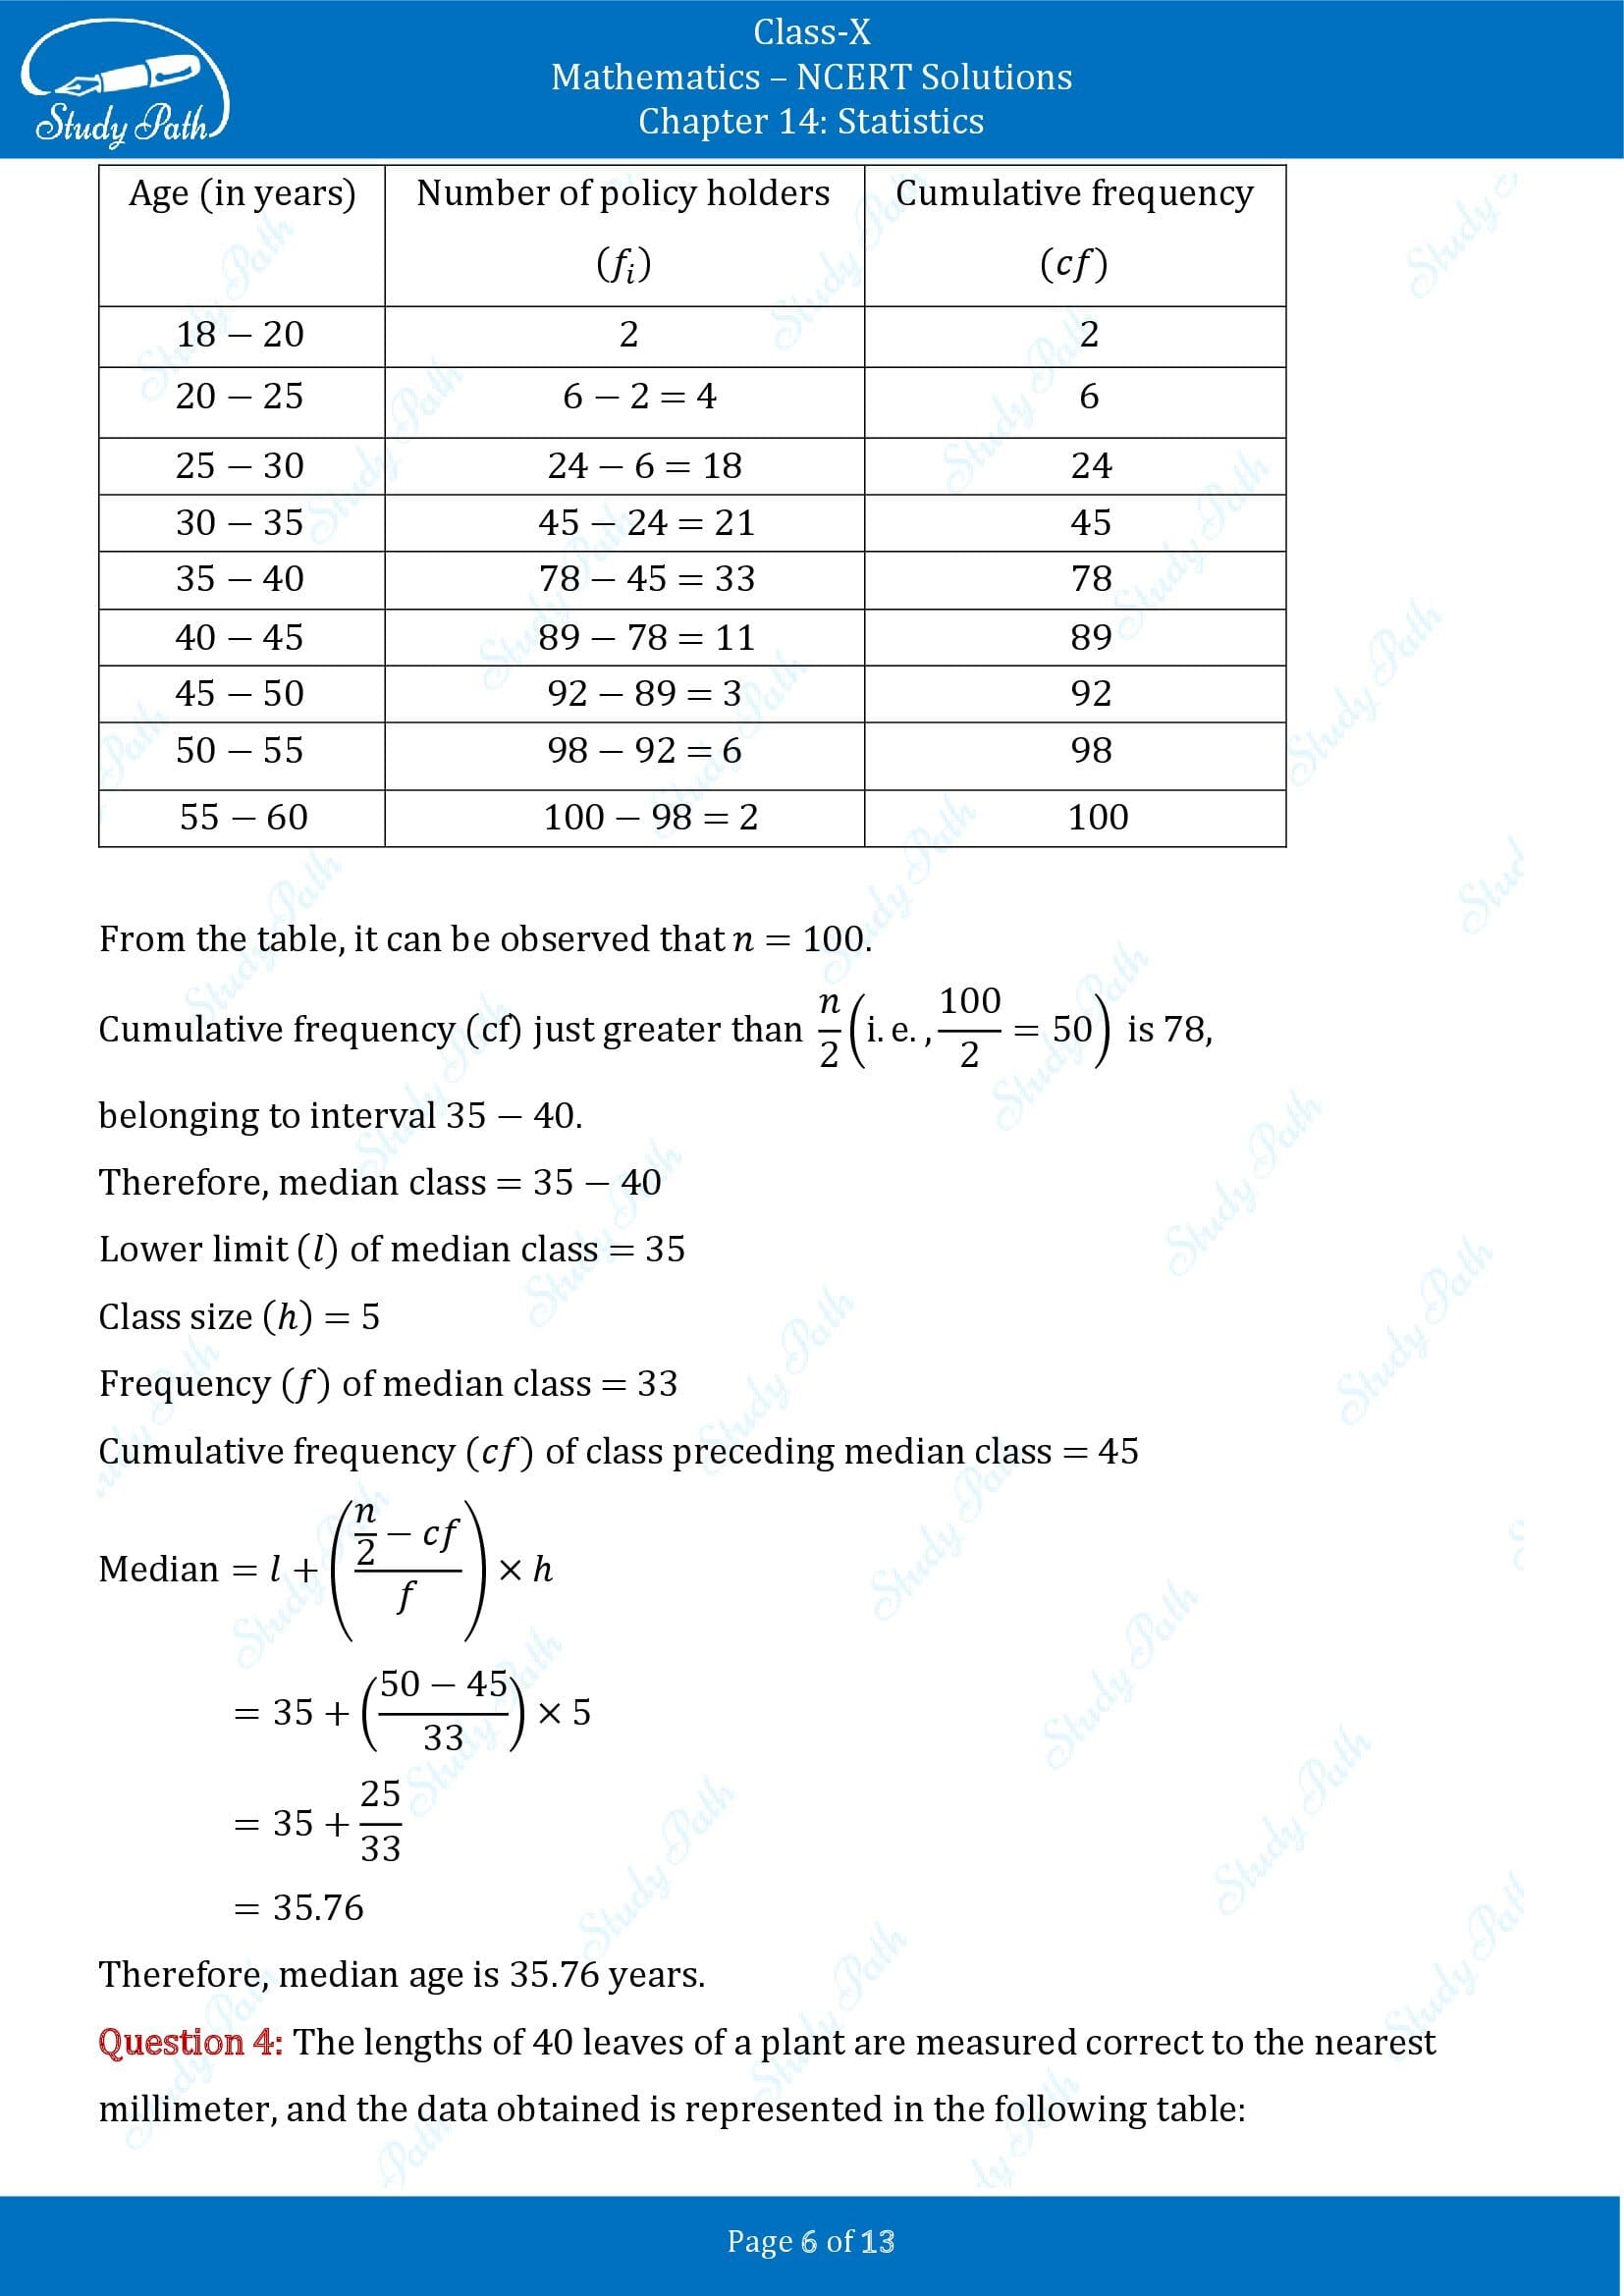 NCERT Solutions for Class 10 Maths Chapter 14 Statistics Exercise 14.3 00006